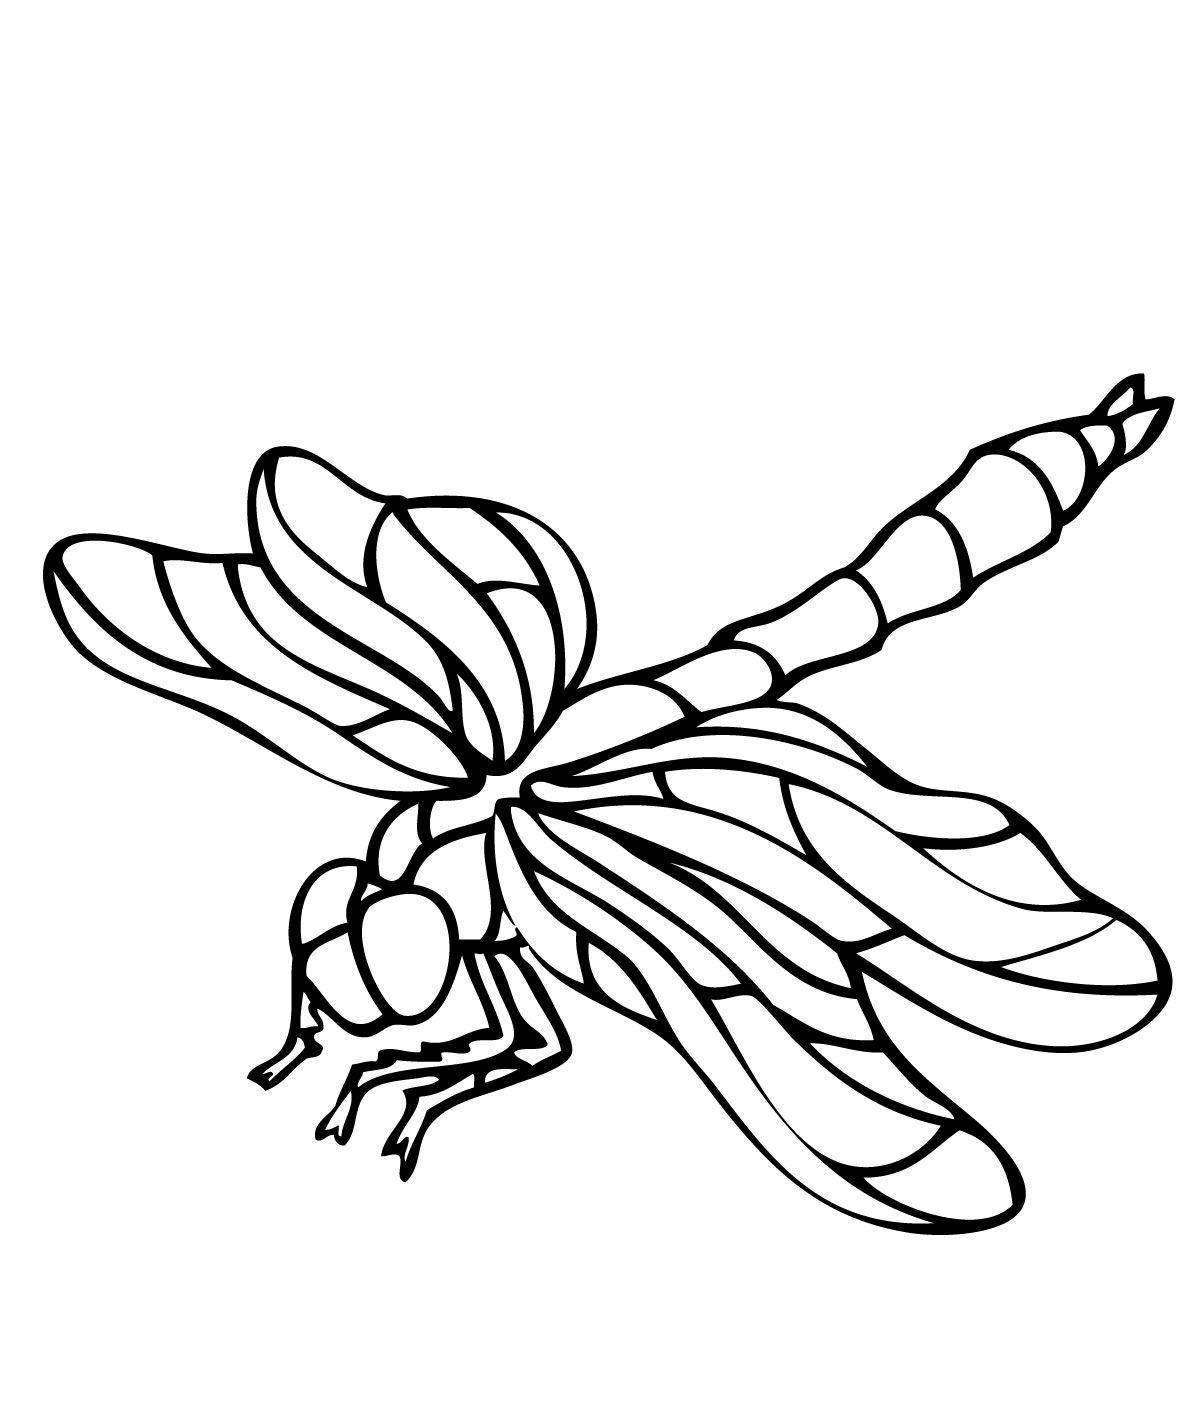 Printable Dragonfly S Of Animalse7ad Coloring Page